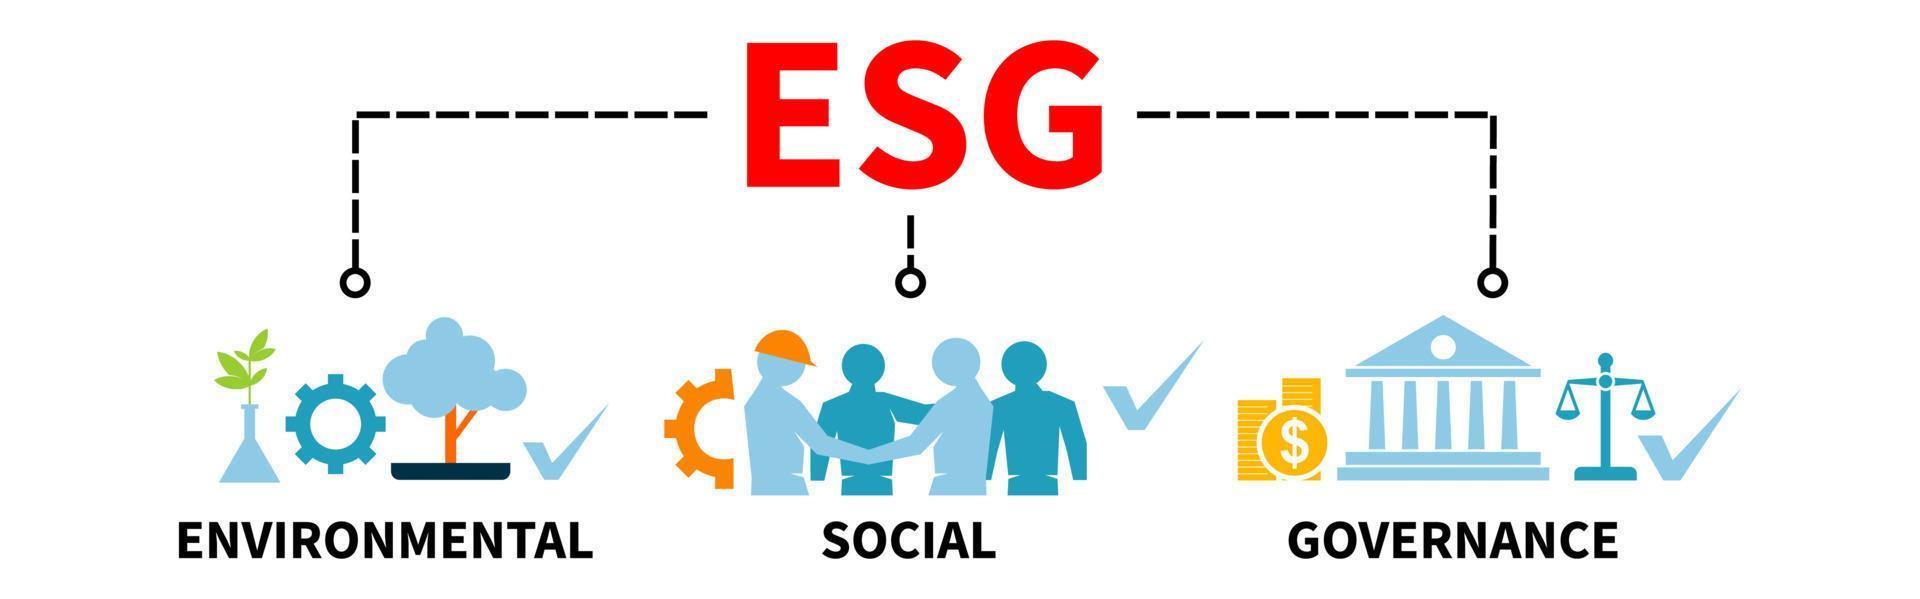 ESG Banner Web Vector Illustration Sustainable and Ethical Business Concept for Environmental Social Governance with icon